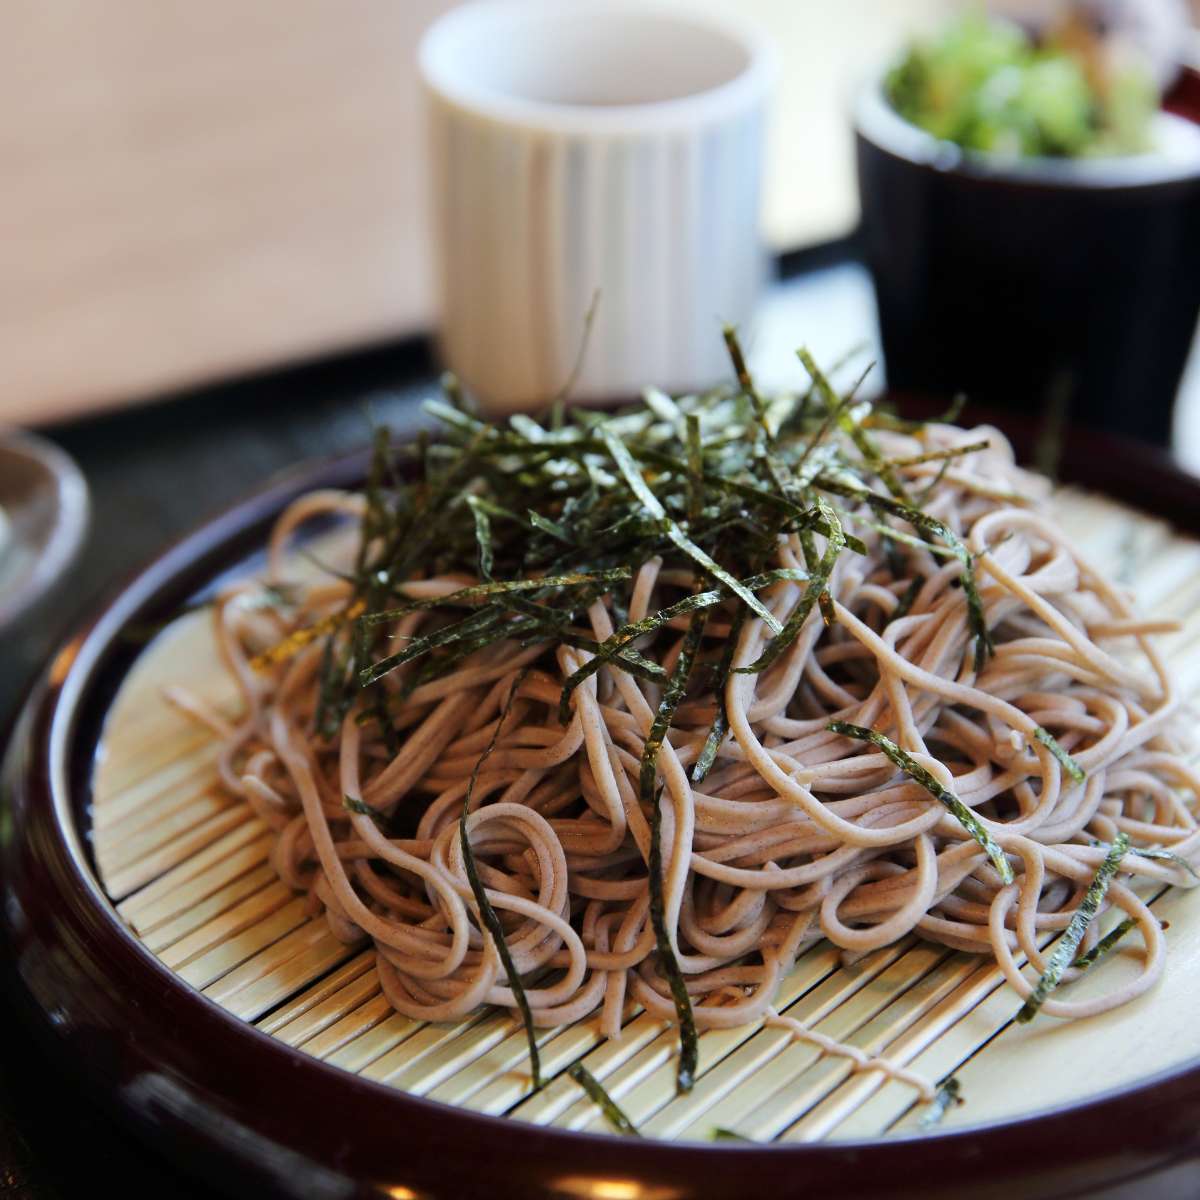 Soba noodles topped with greens in a plate in front of a cups on a table
